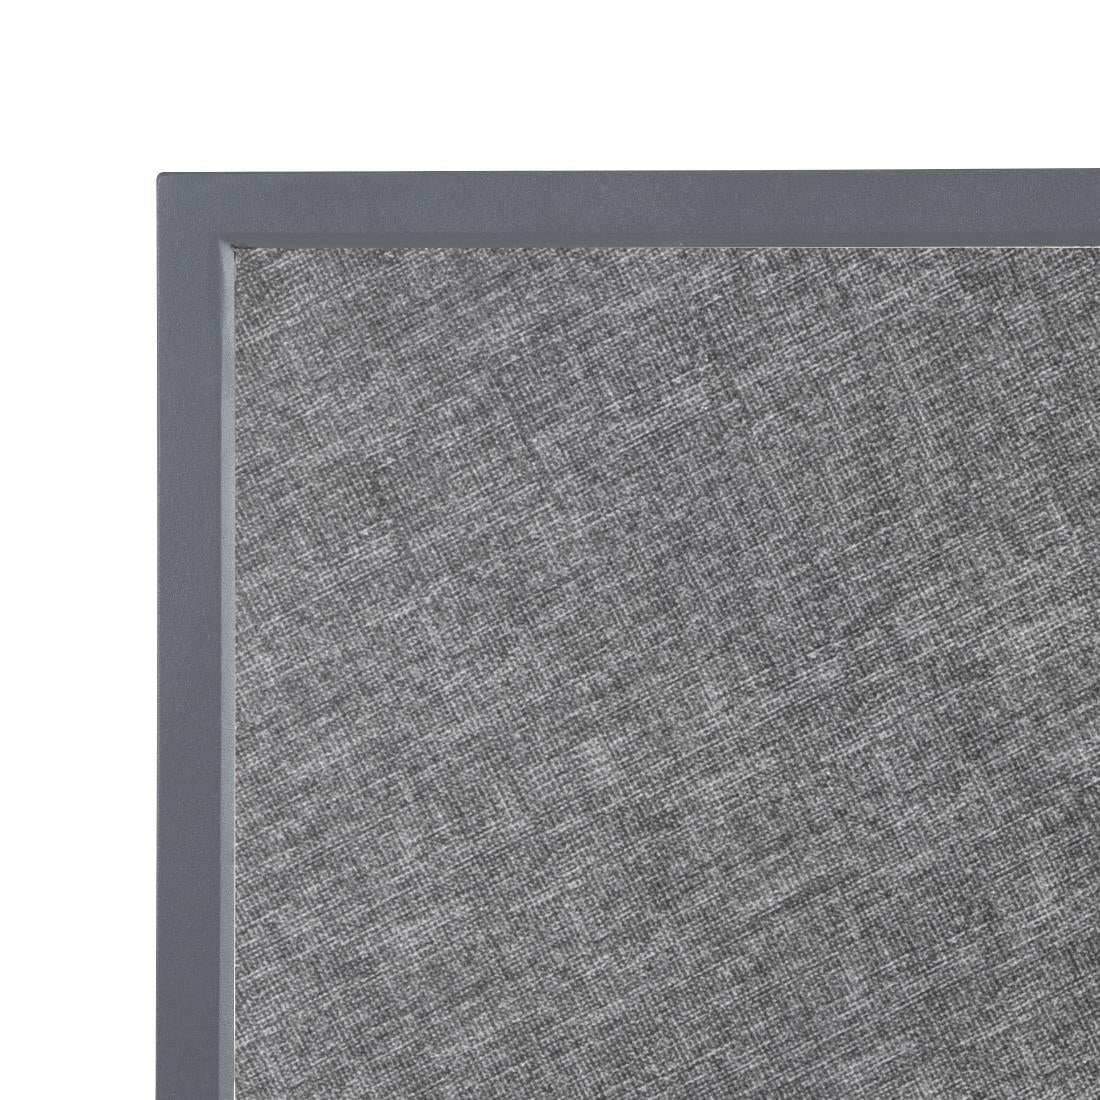 DZ873 Bolero Black Brushed Mix Outdoor Tempered Glass Table Top Square Grey Trim 700mm